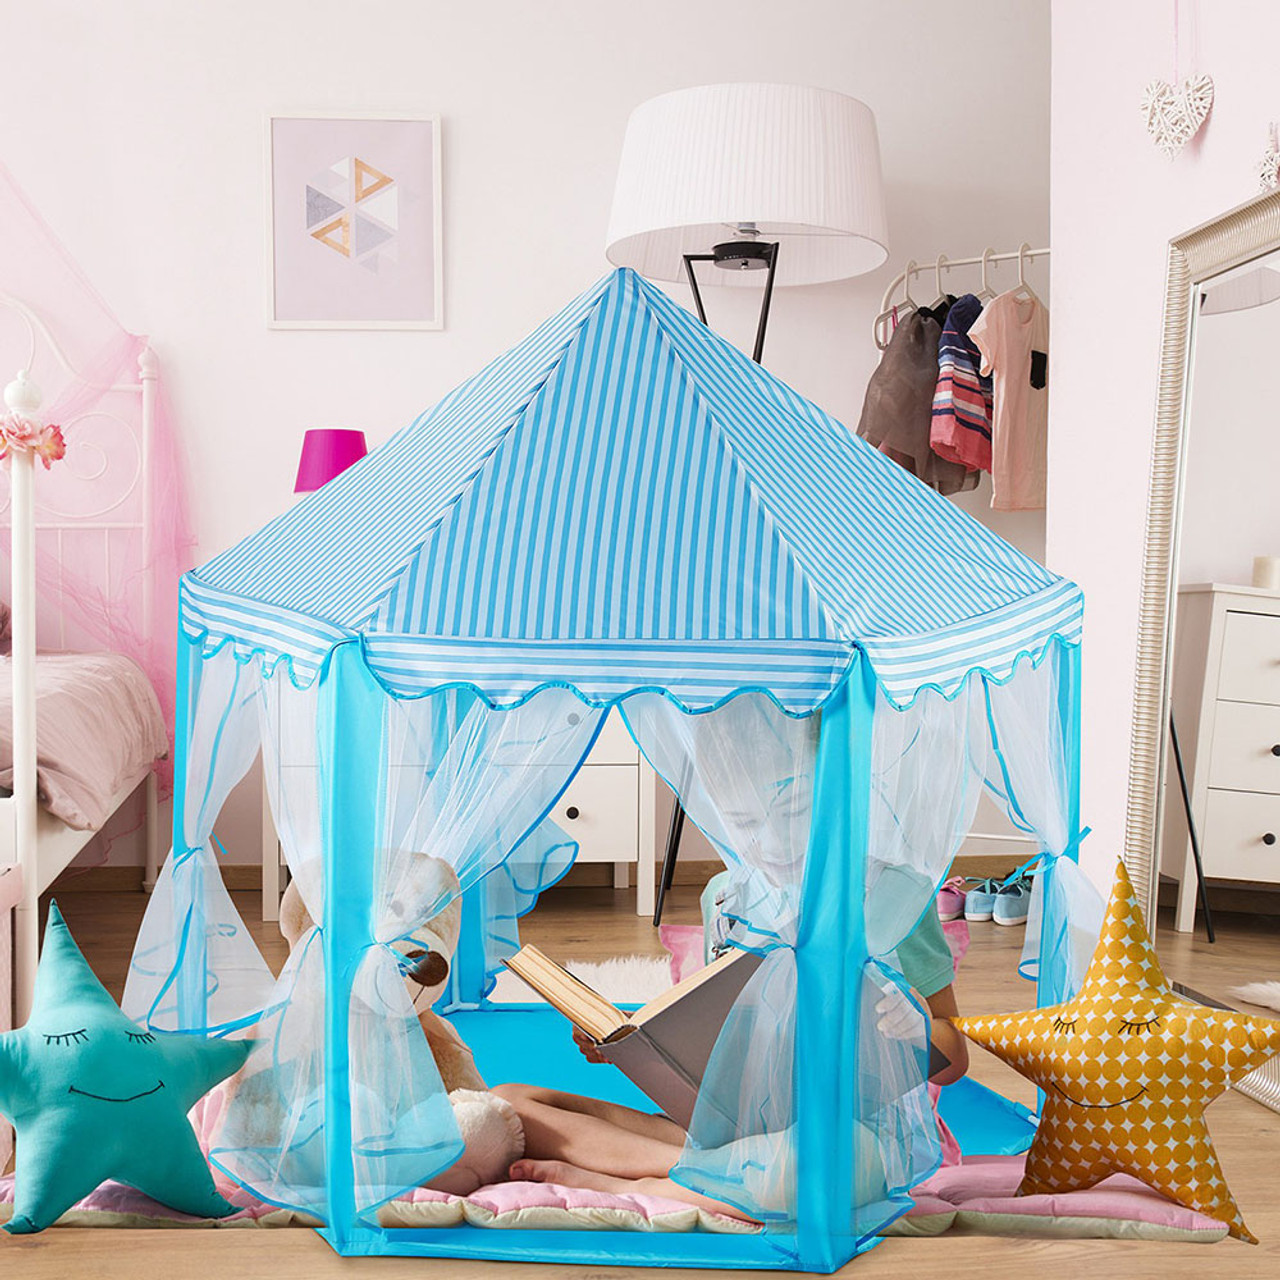 Kids' Dream Castle Play Tent with Storage Bag product image